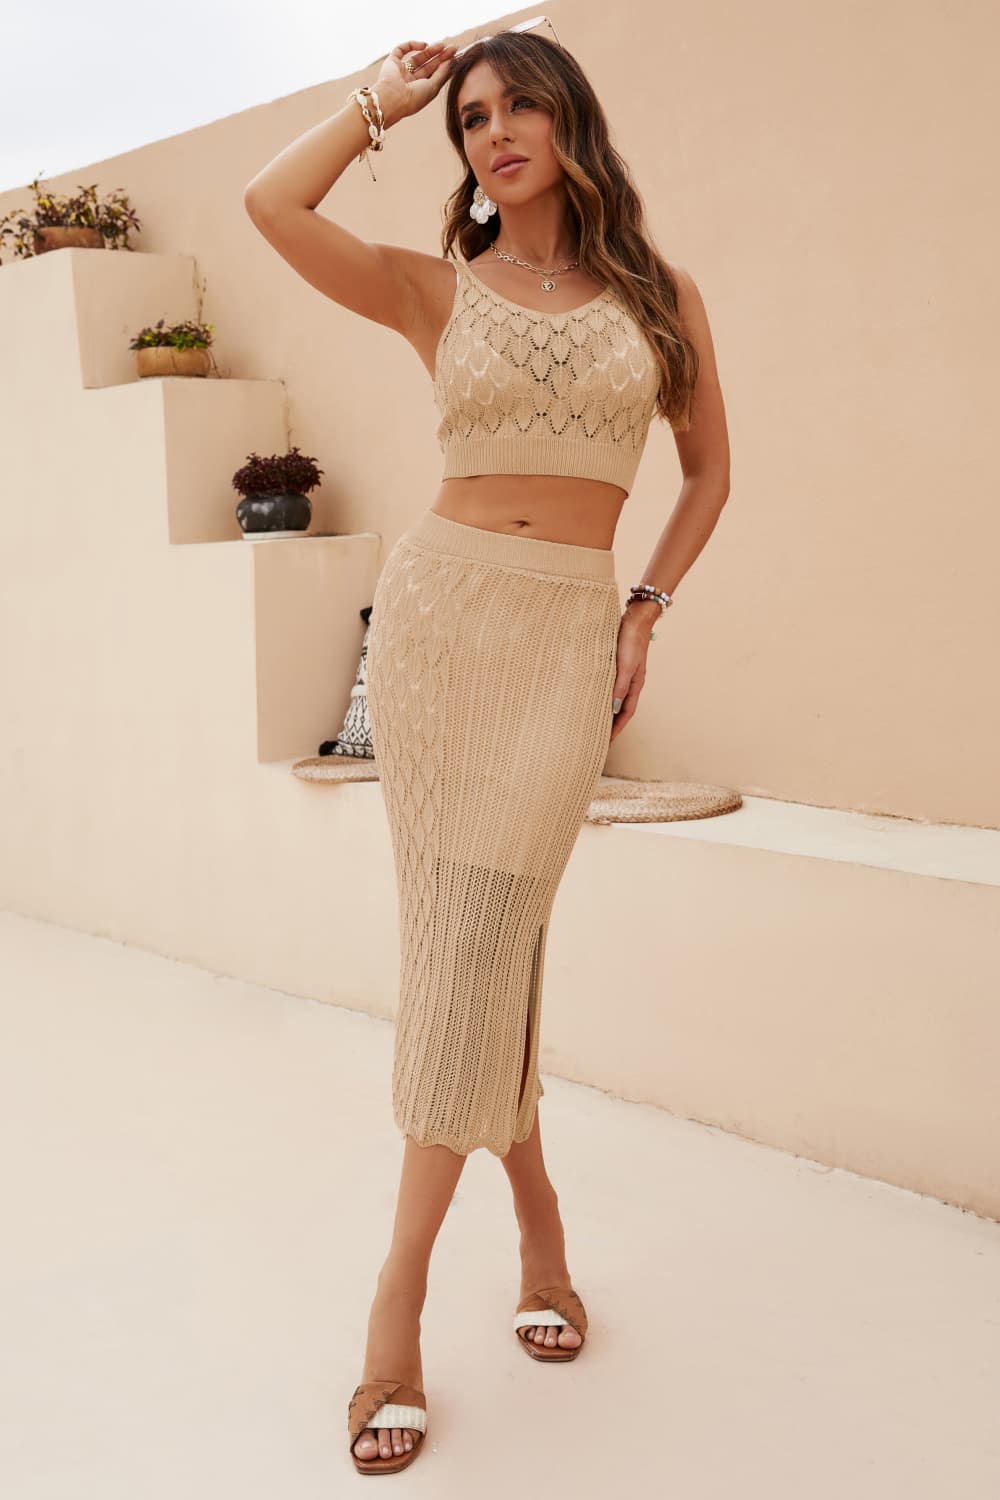 Openwork Cropped Tank and Split Skirt Set - Fashion Girl Online Store